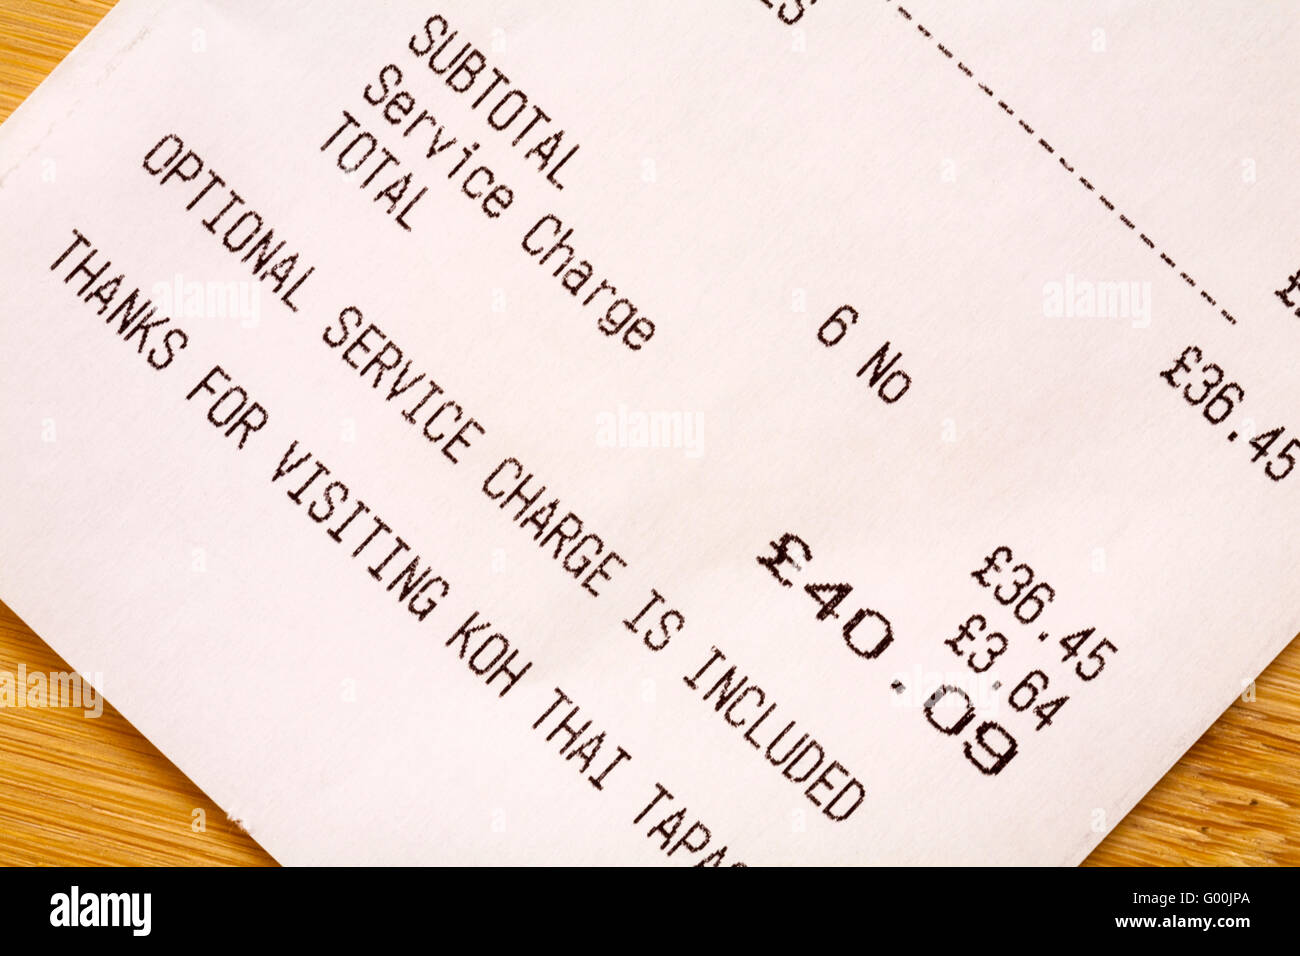 Optional service charge is included on restaurant bill Stock Photo